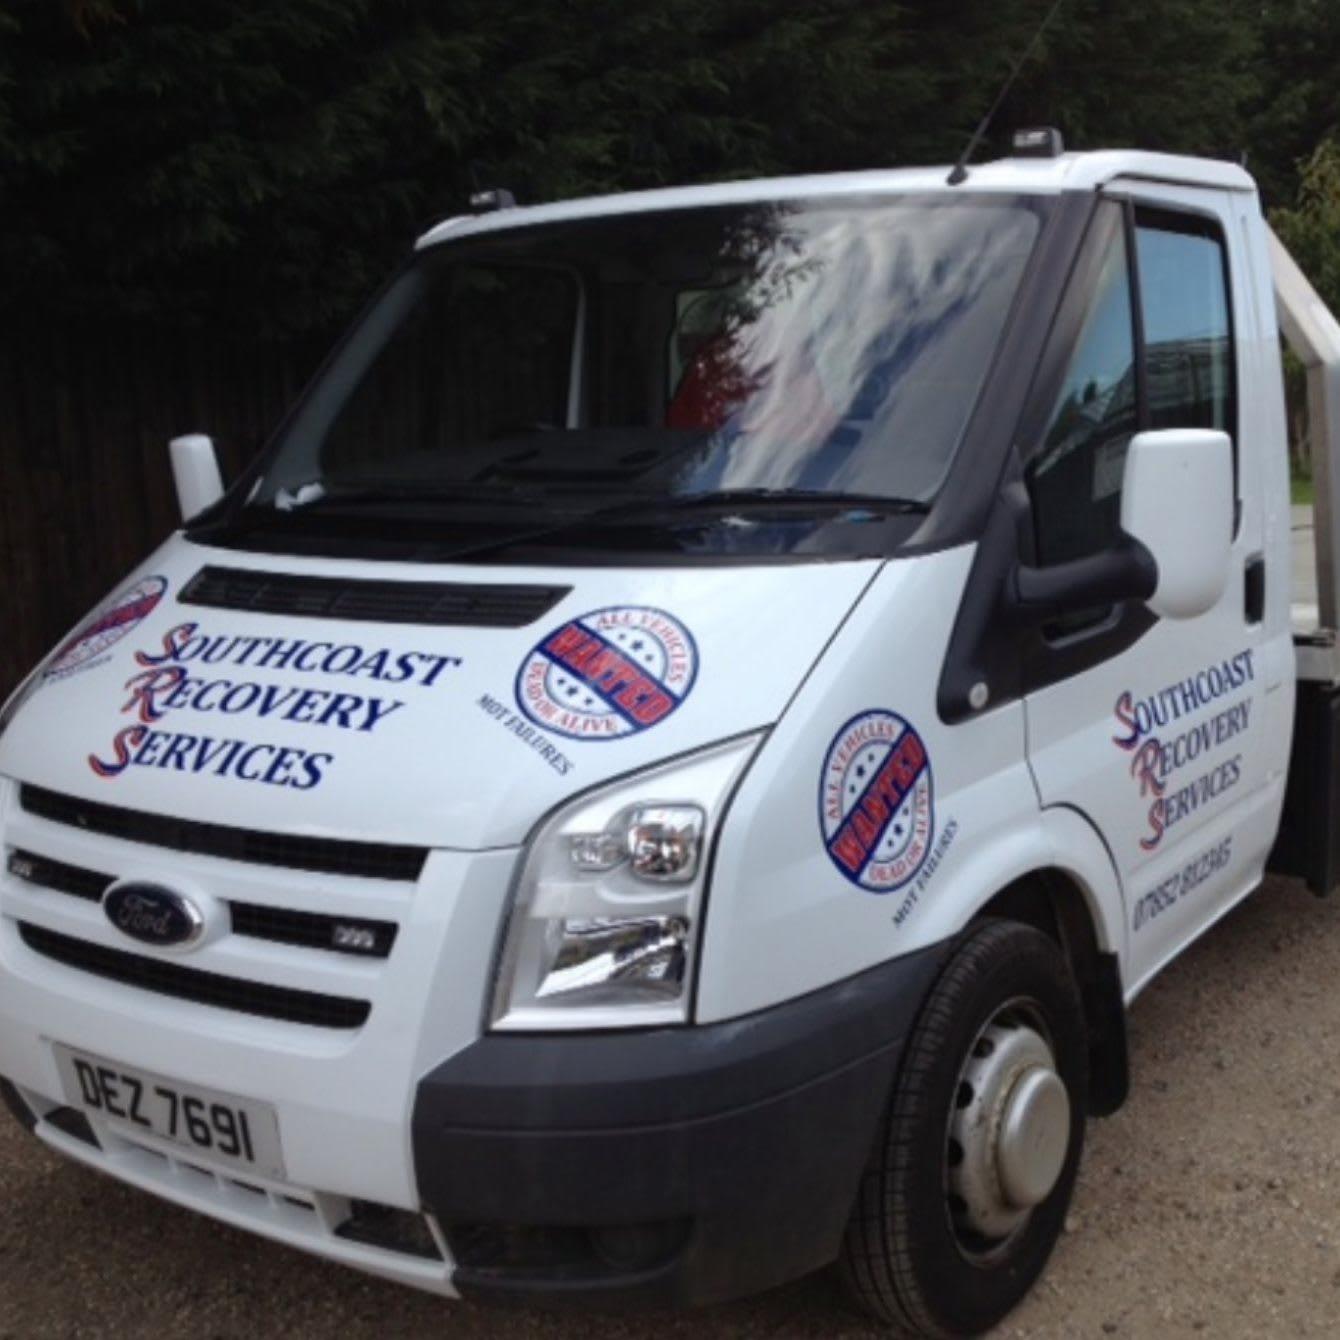 Images South Coast & Chichester Recovery Services